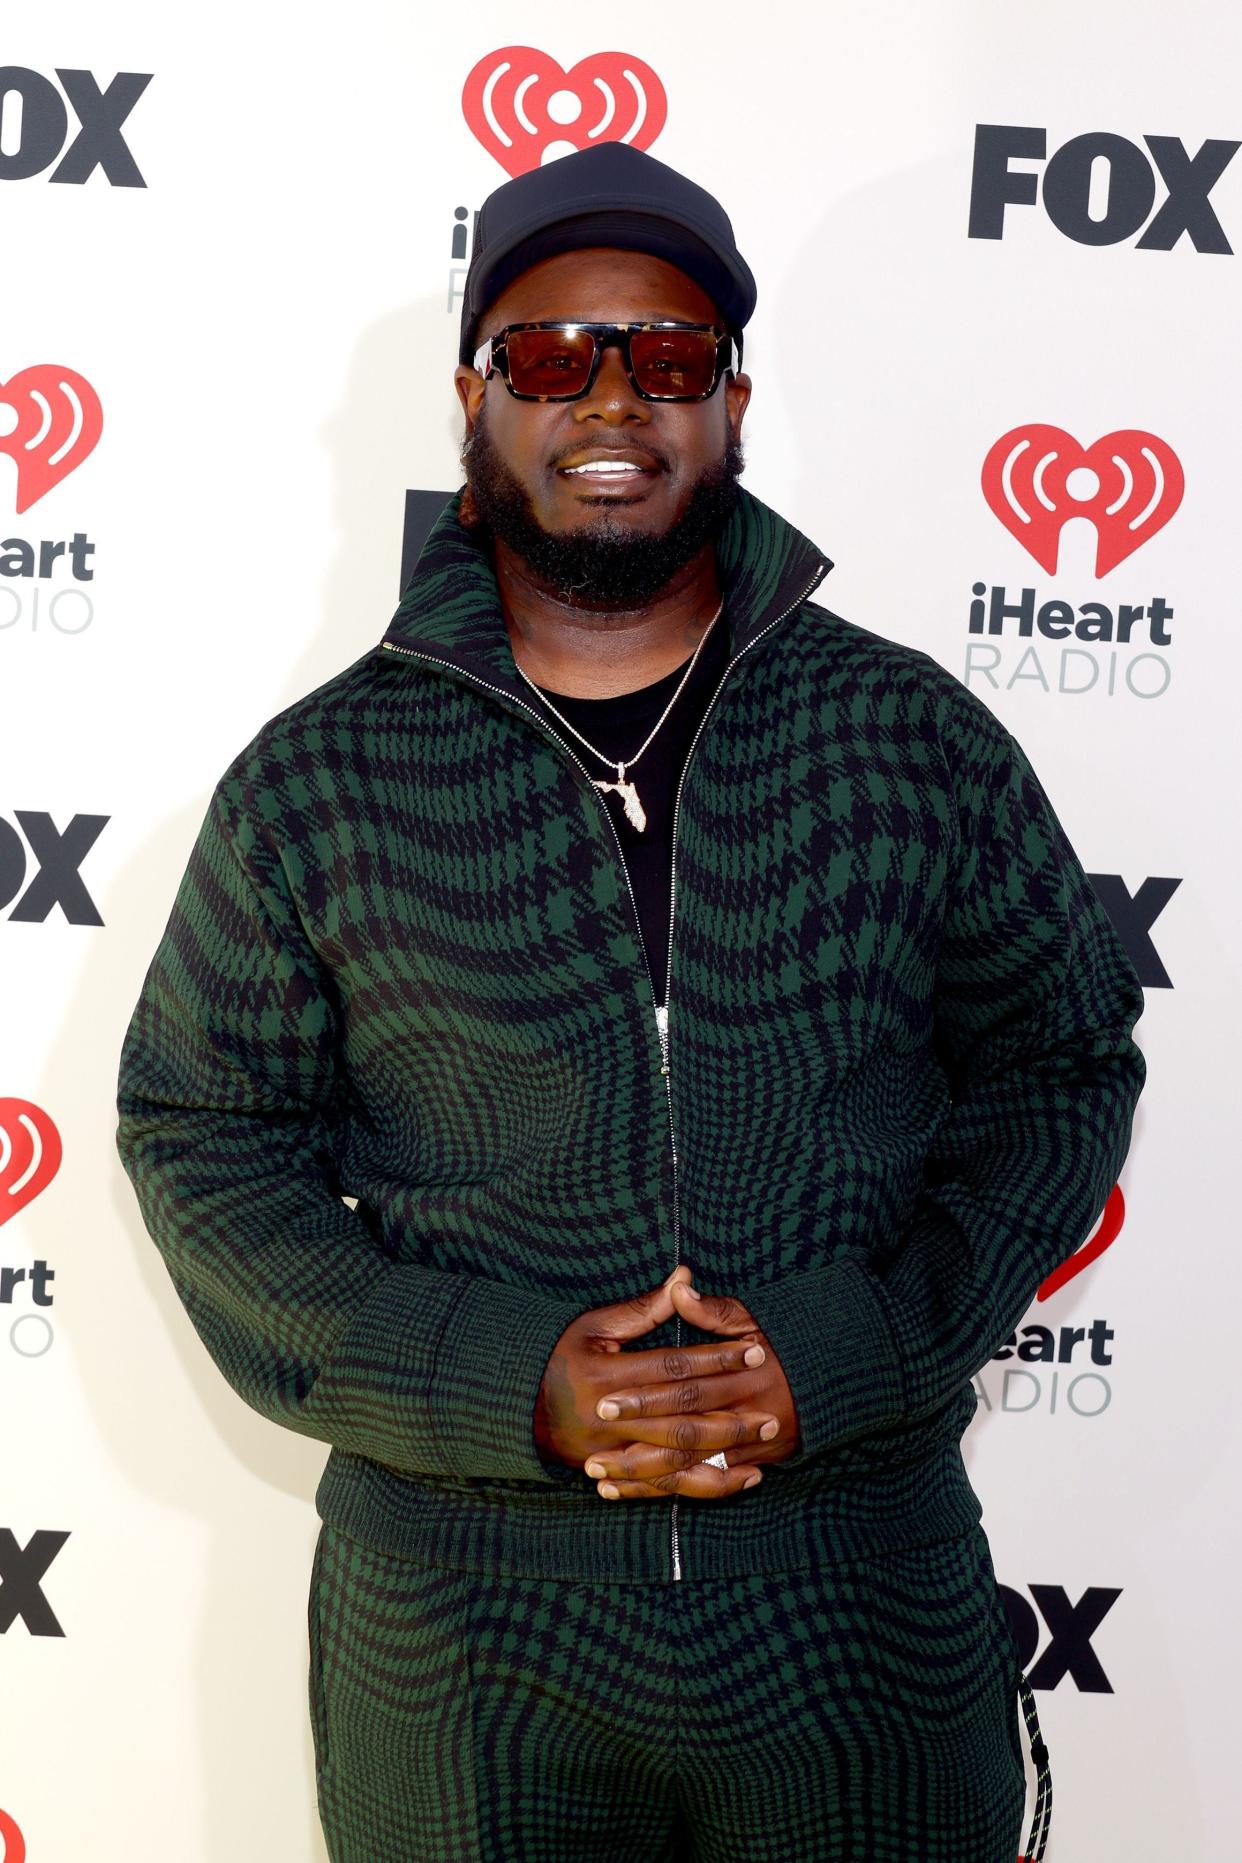 LOS ANGELES, CALIFORNIA - APRIL 01: (FOR EDITORIAL USE ONLY) T-Pain attends the 2024 iHeartRadio Music Awards at Dolby Theatre in Los Angeles, California on April 01, 2024. Broadcasted live on FOX. (Photo by Jesse Grant/Getty Images for iHeartRadio) ORG XMIT: 776125572 ORIG FILE ID: 2131287698